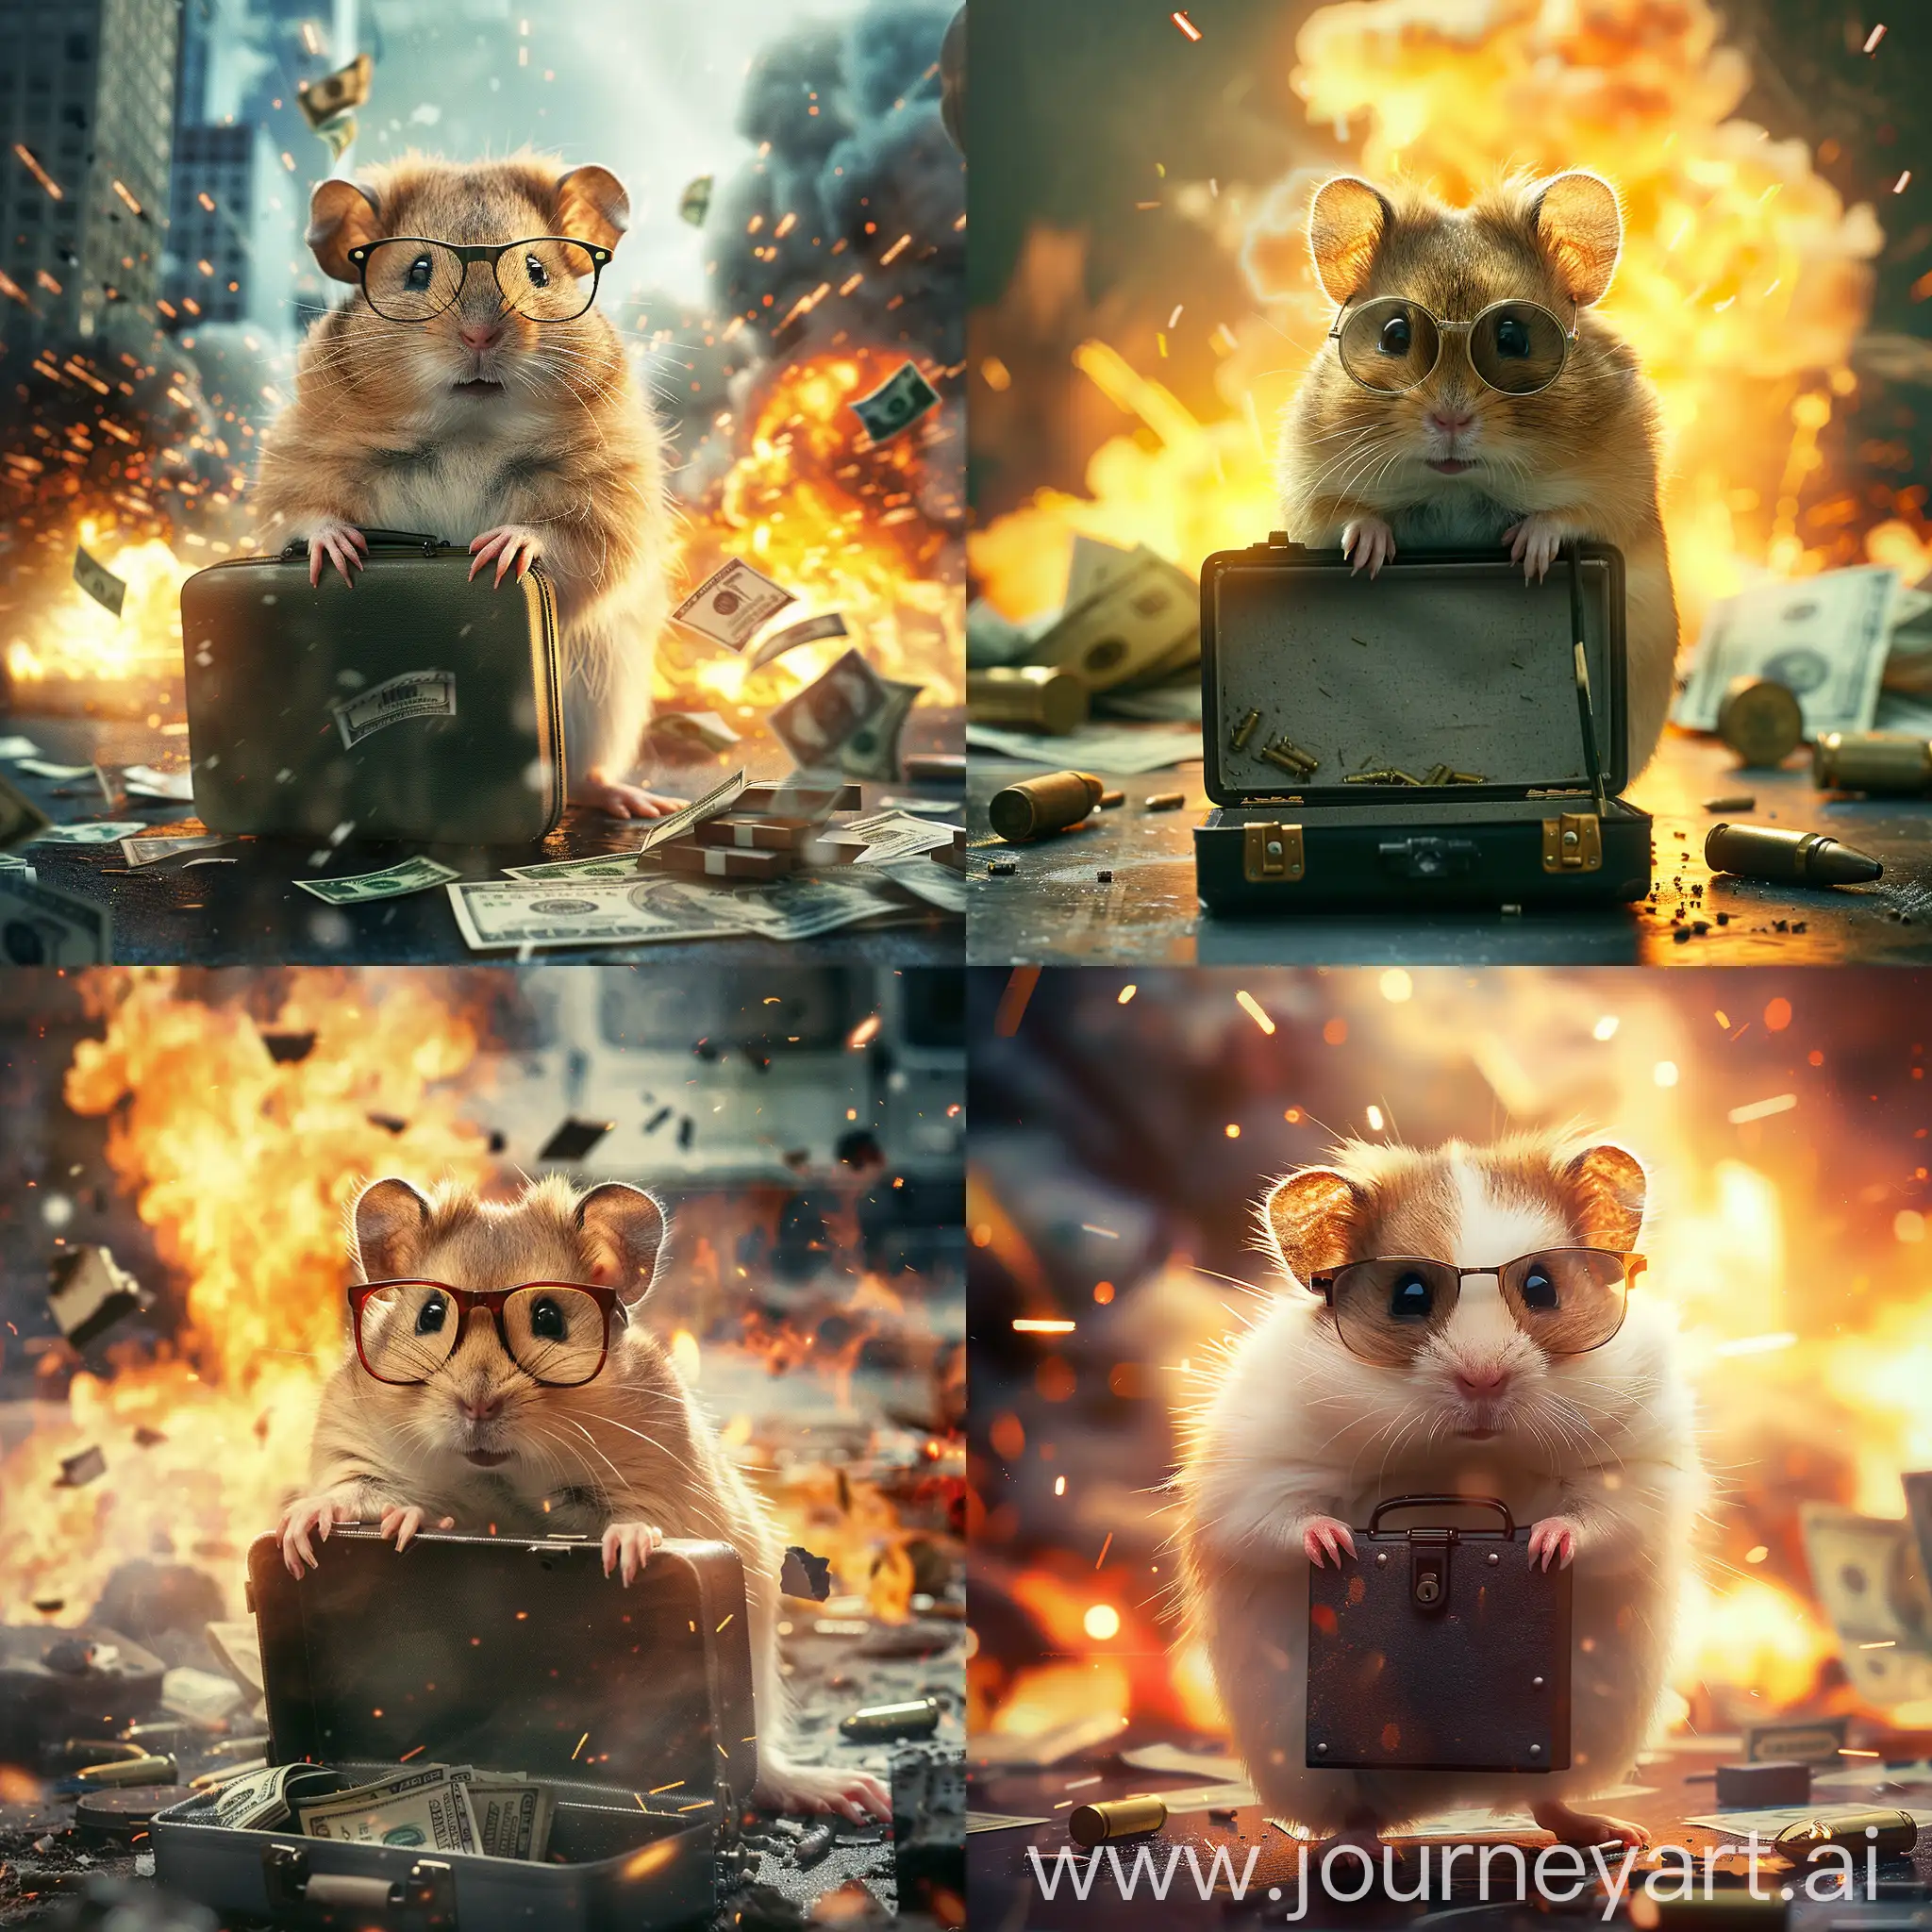 Hamster-in-Glasses-with-Money-Case-Amid-Explosions-and-Shootouts